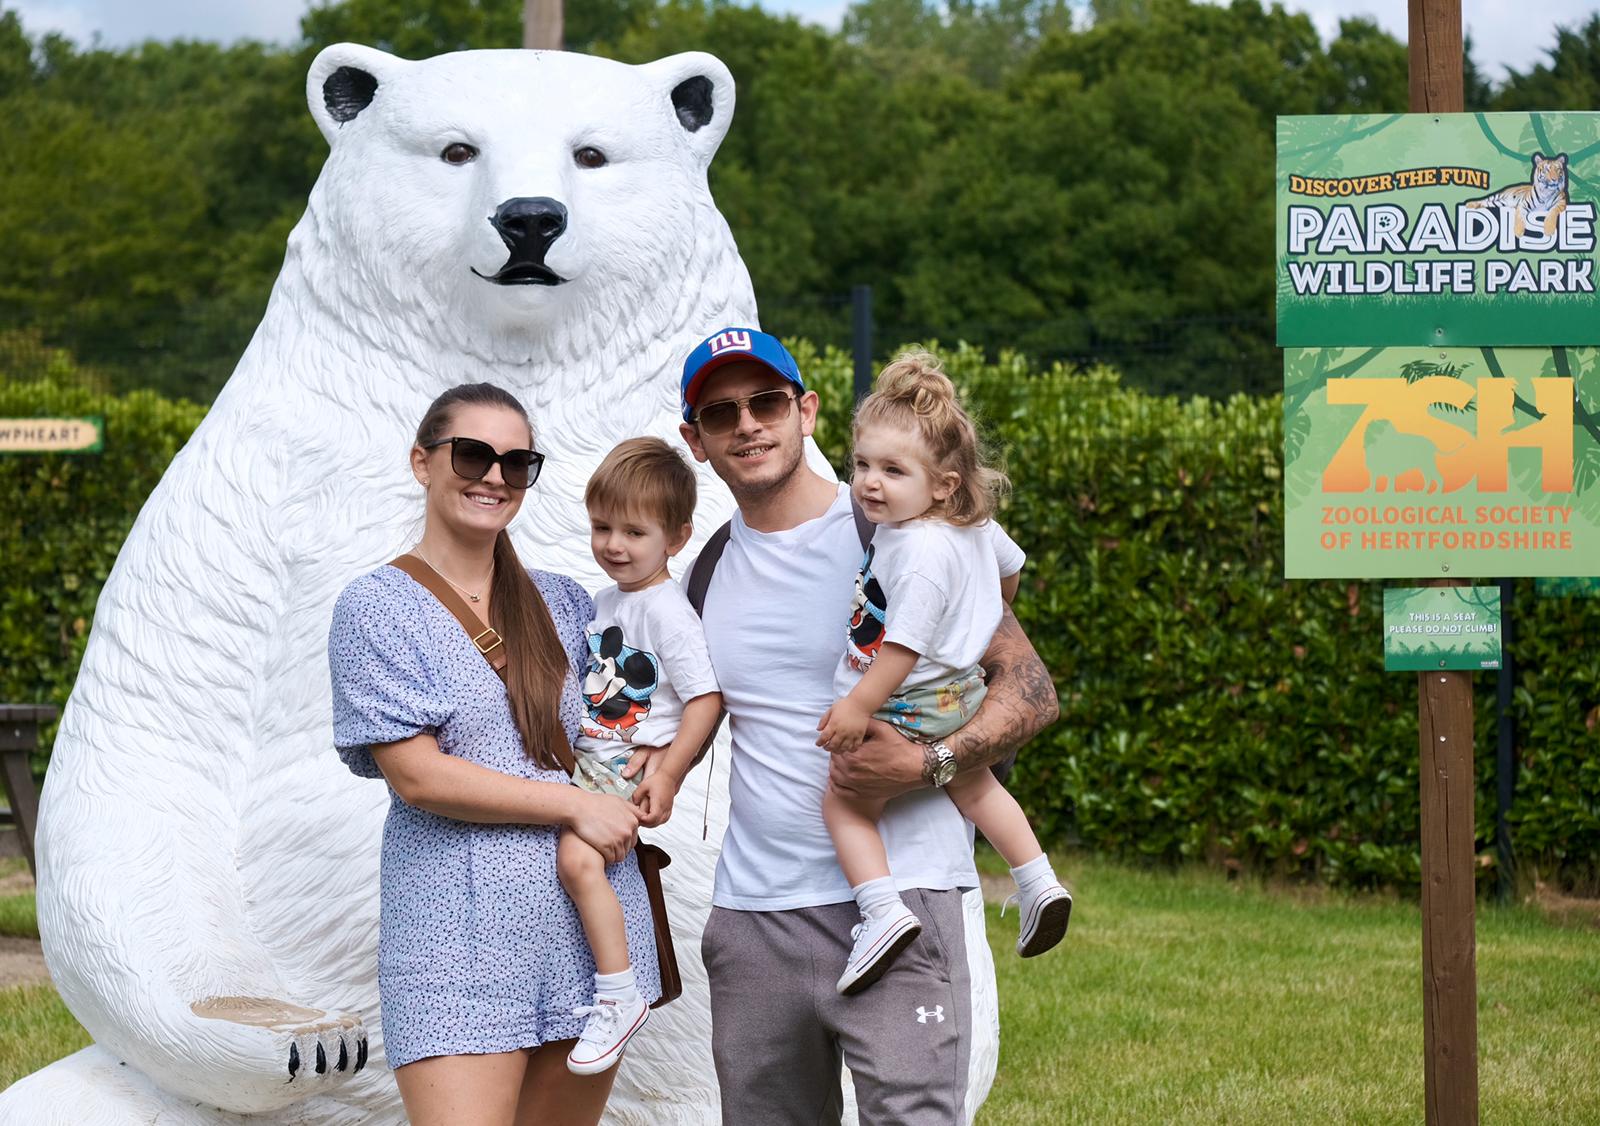 Paradise Wildlife Park is open to the public